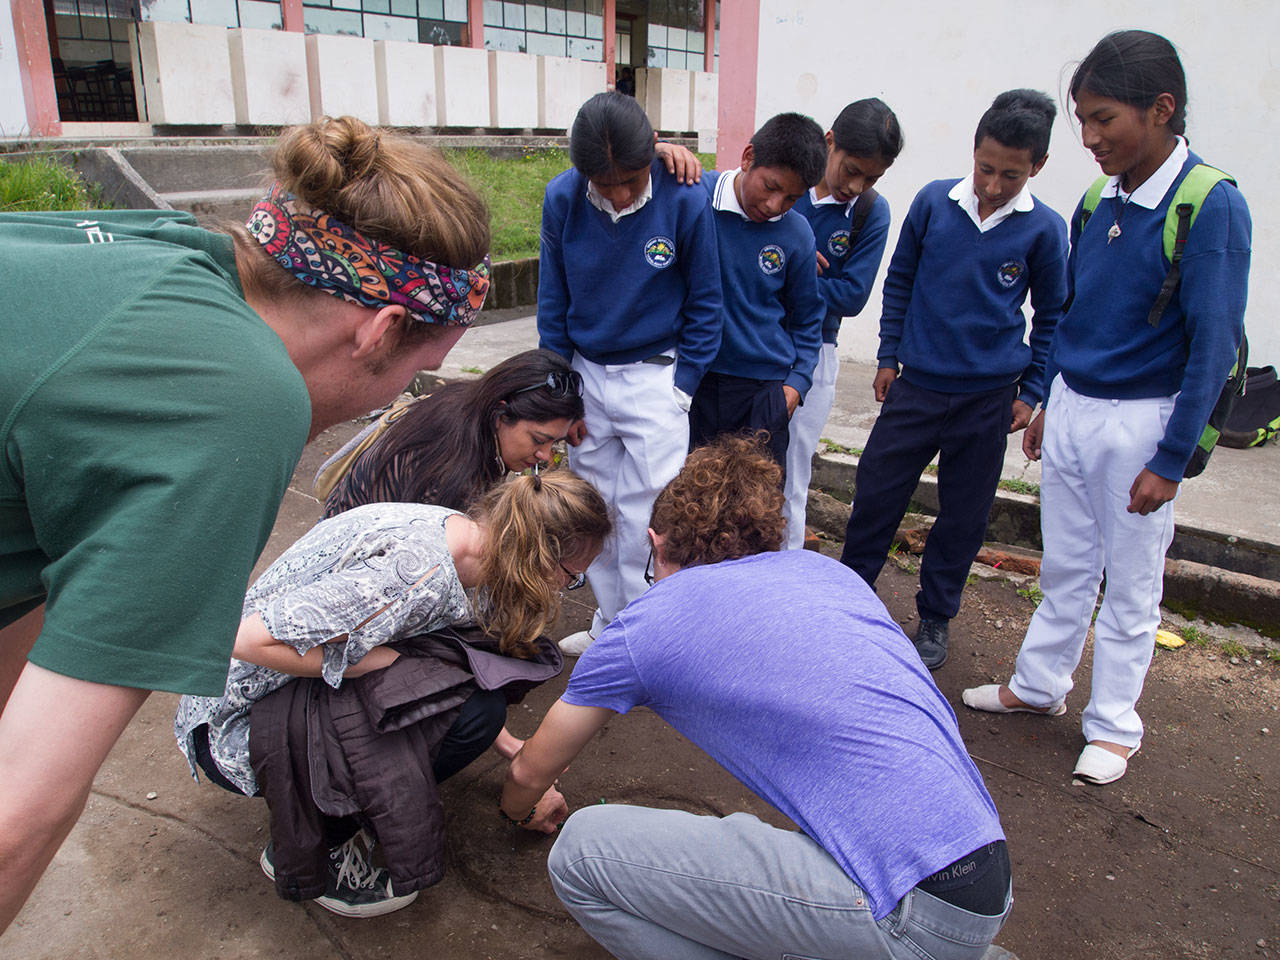 As part of an introduction to Afro-Ecuadorian and indigenous communities, Omnibus 119 visited a school for Kichwa students north of Quito. While on the playgrounds, groups of students made sure they said hello to each person before teaching them games, including a marble maze scratched into the dirt. Photo courtesy of Emma Tremblay